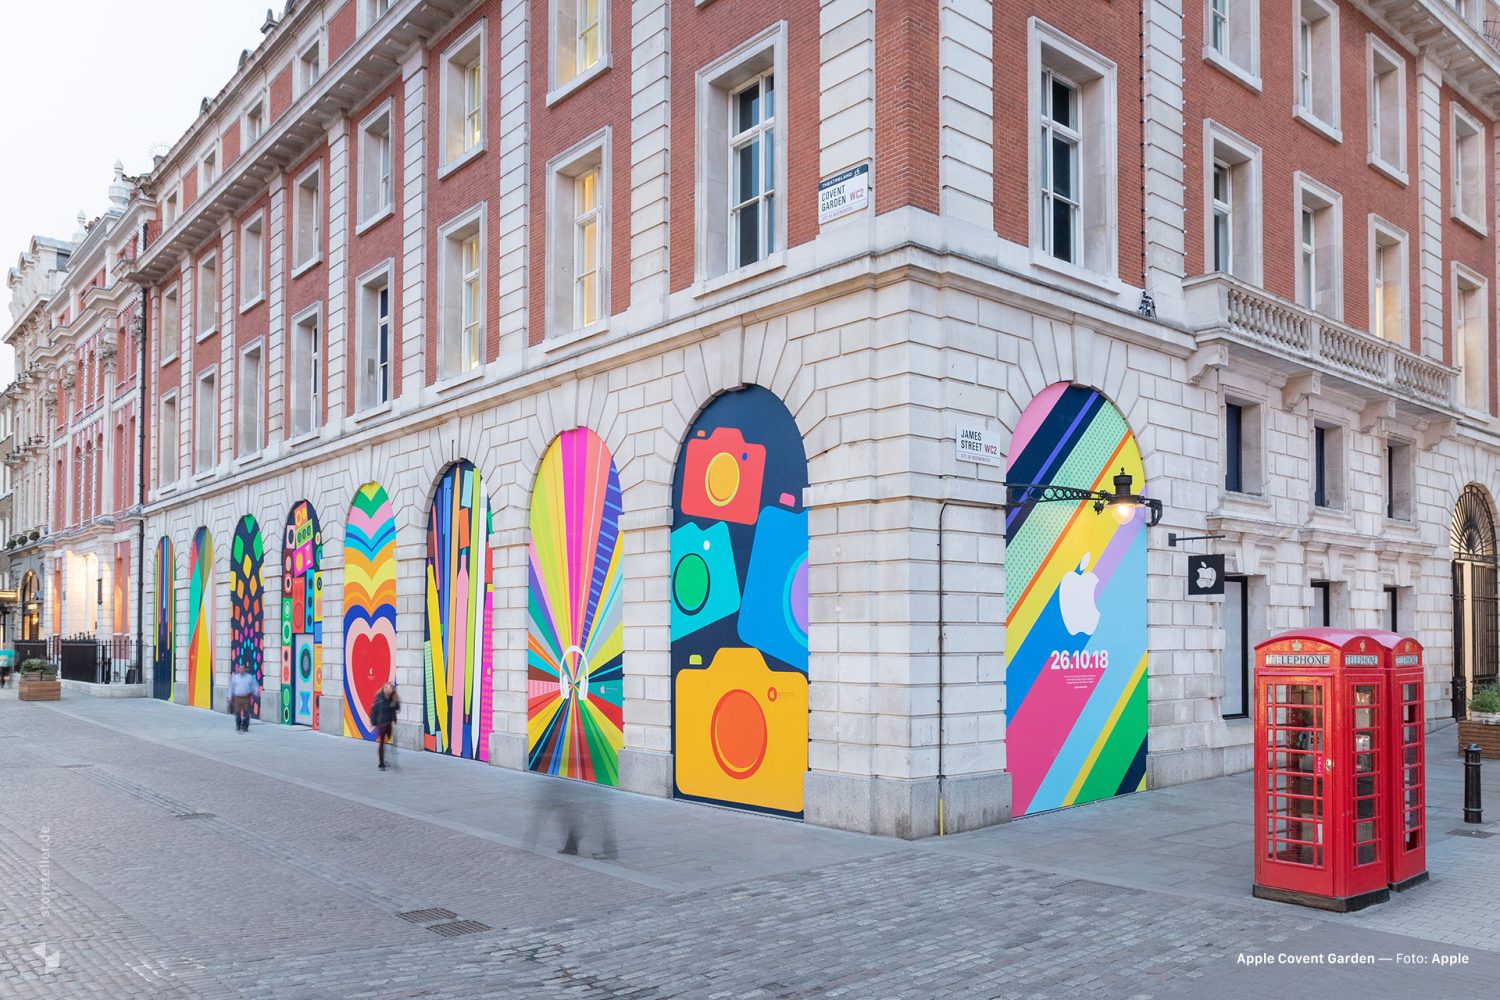 Apple's Covent Garden retail store in London